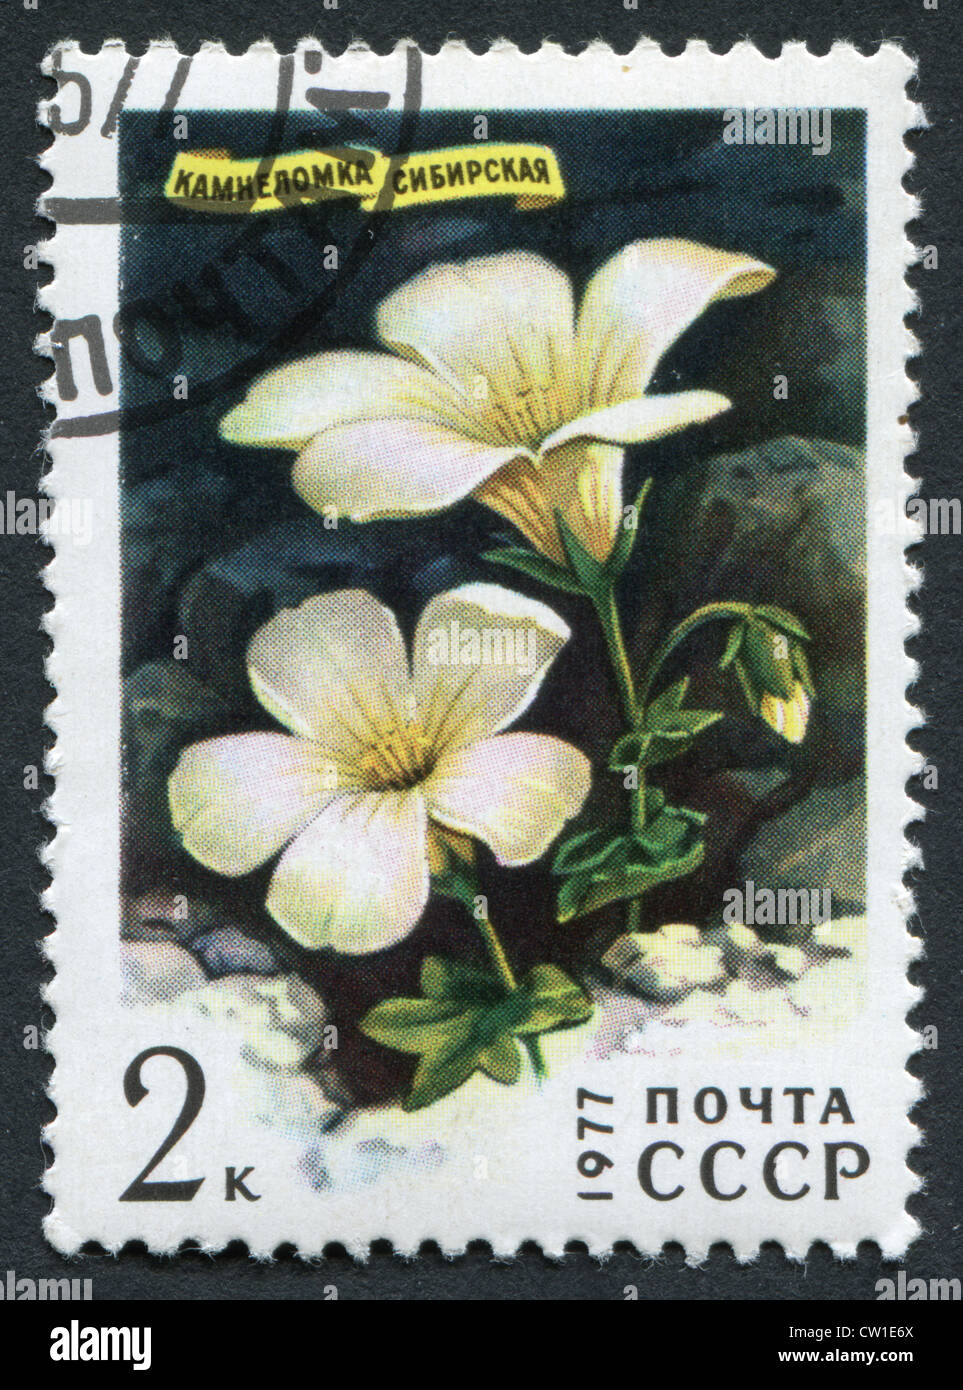 USSR - CIRCA 1977: Postage stamps printed in the USSR, shows a flower of Saxifraga sibirica, circa 1977 Stock Photo